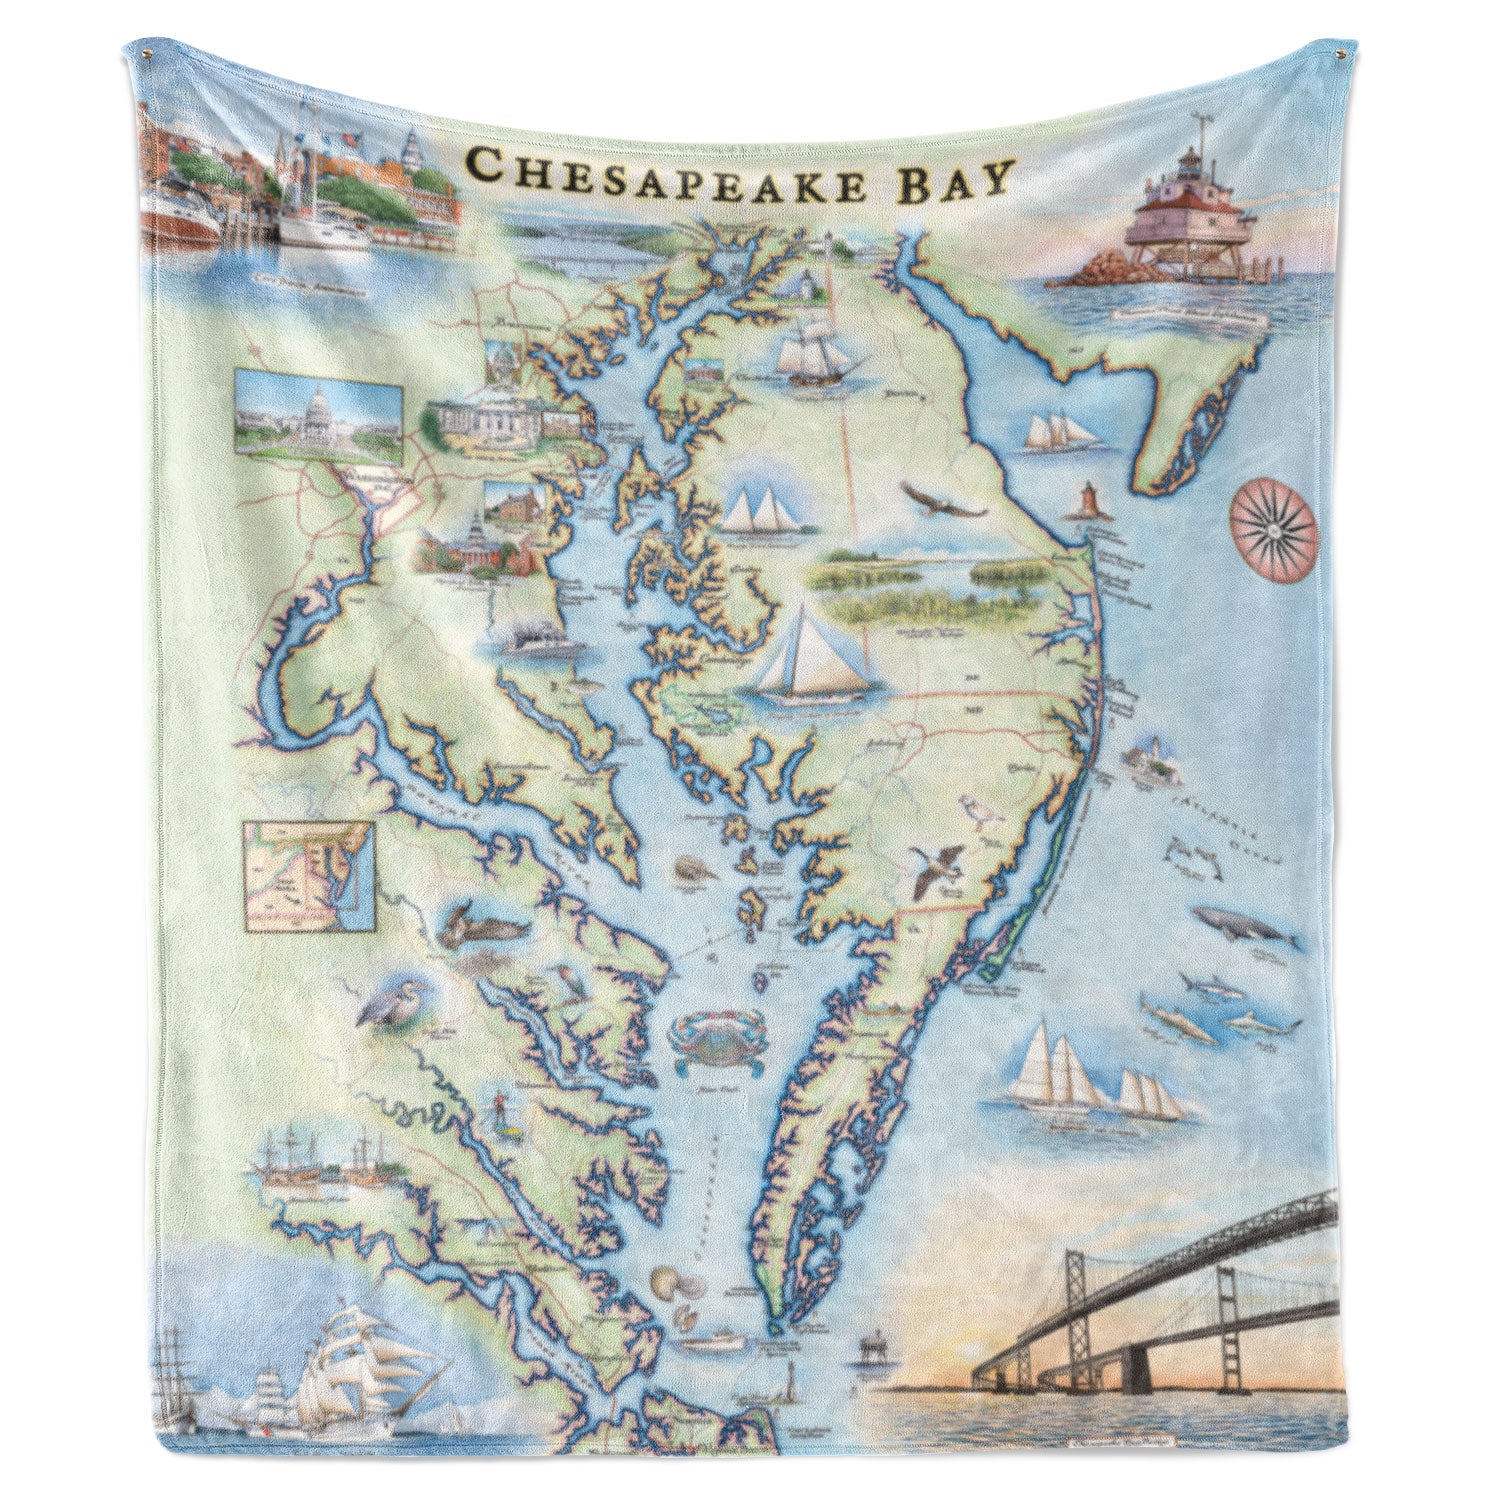 Hanging fleece blanket with the Chesapeake Bay hand-drawn map. Measures 58